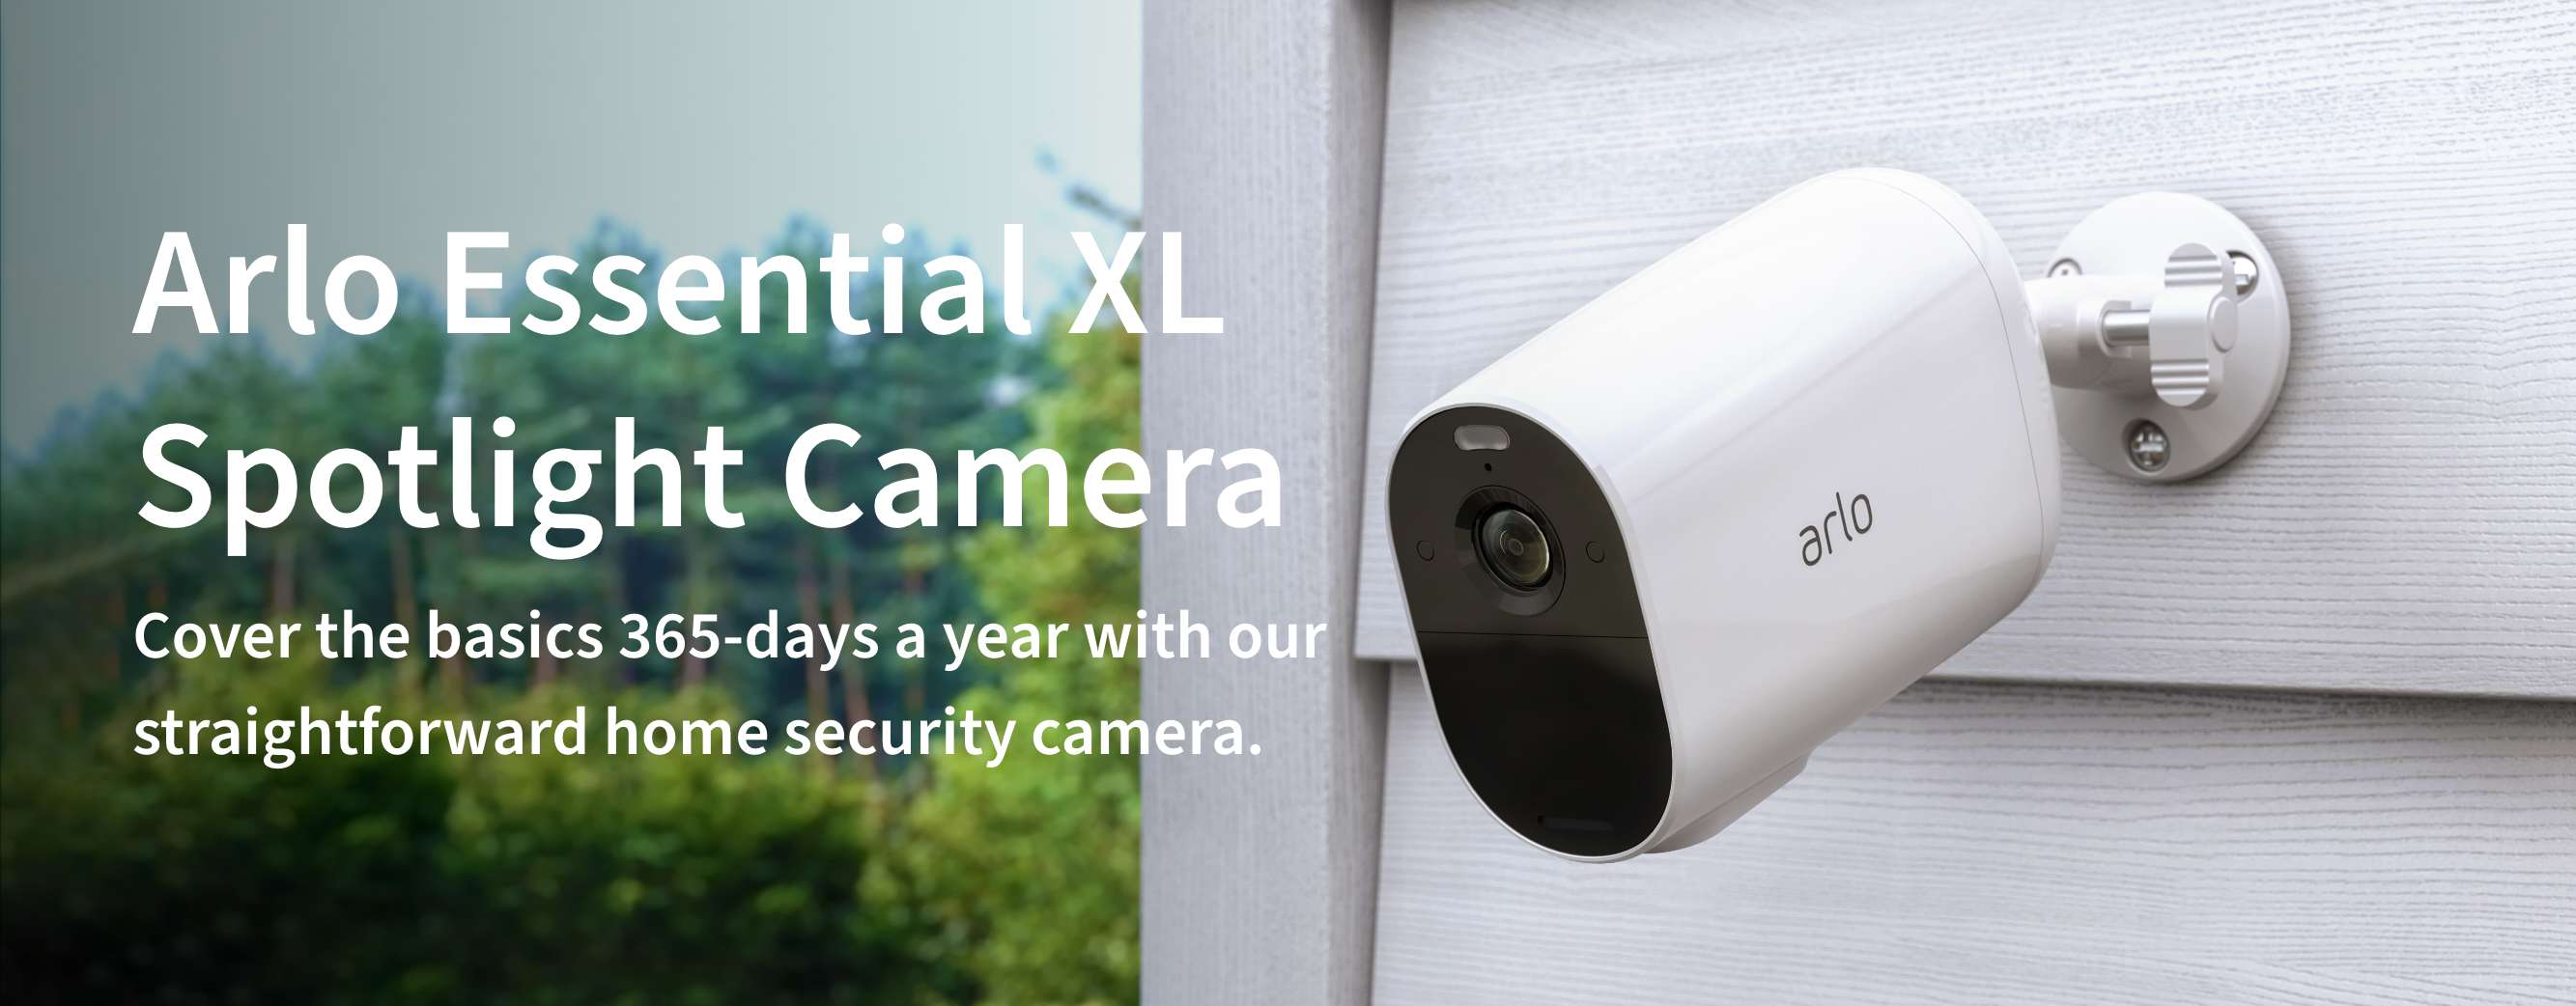 An Arlo Essential XL security camera outside on a fence, gives you straightforward home security